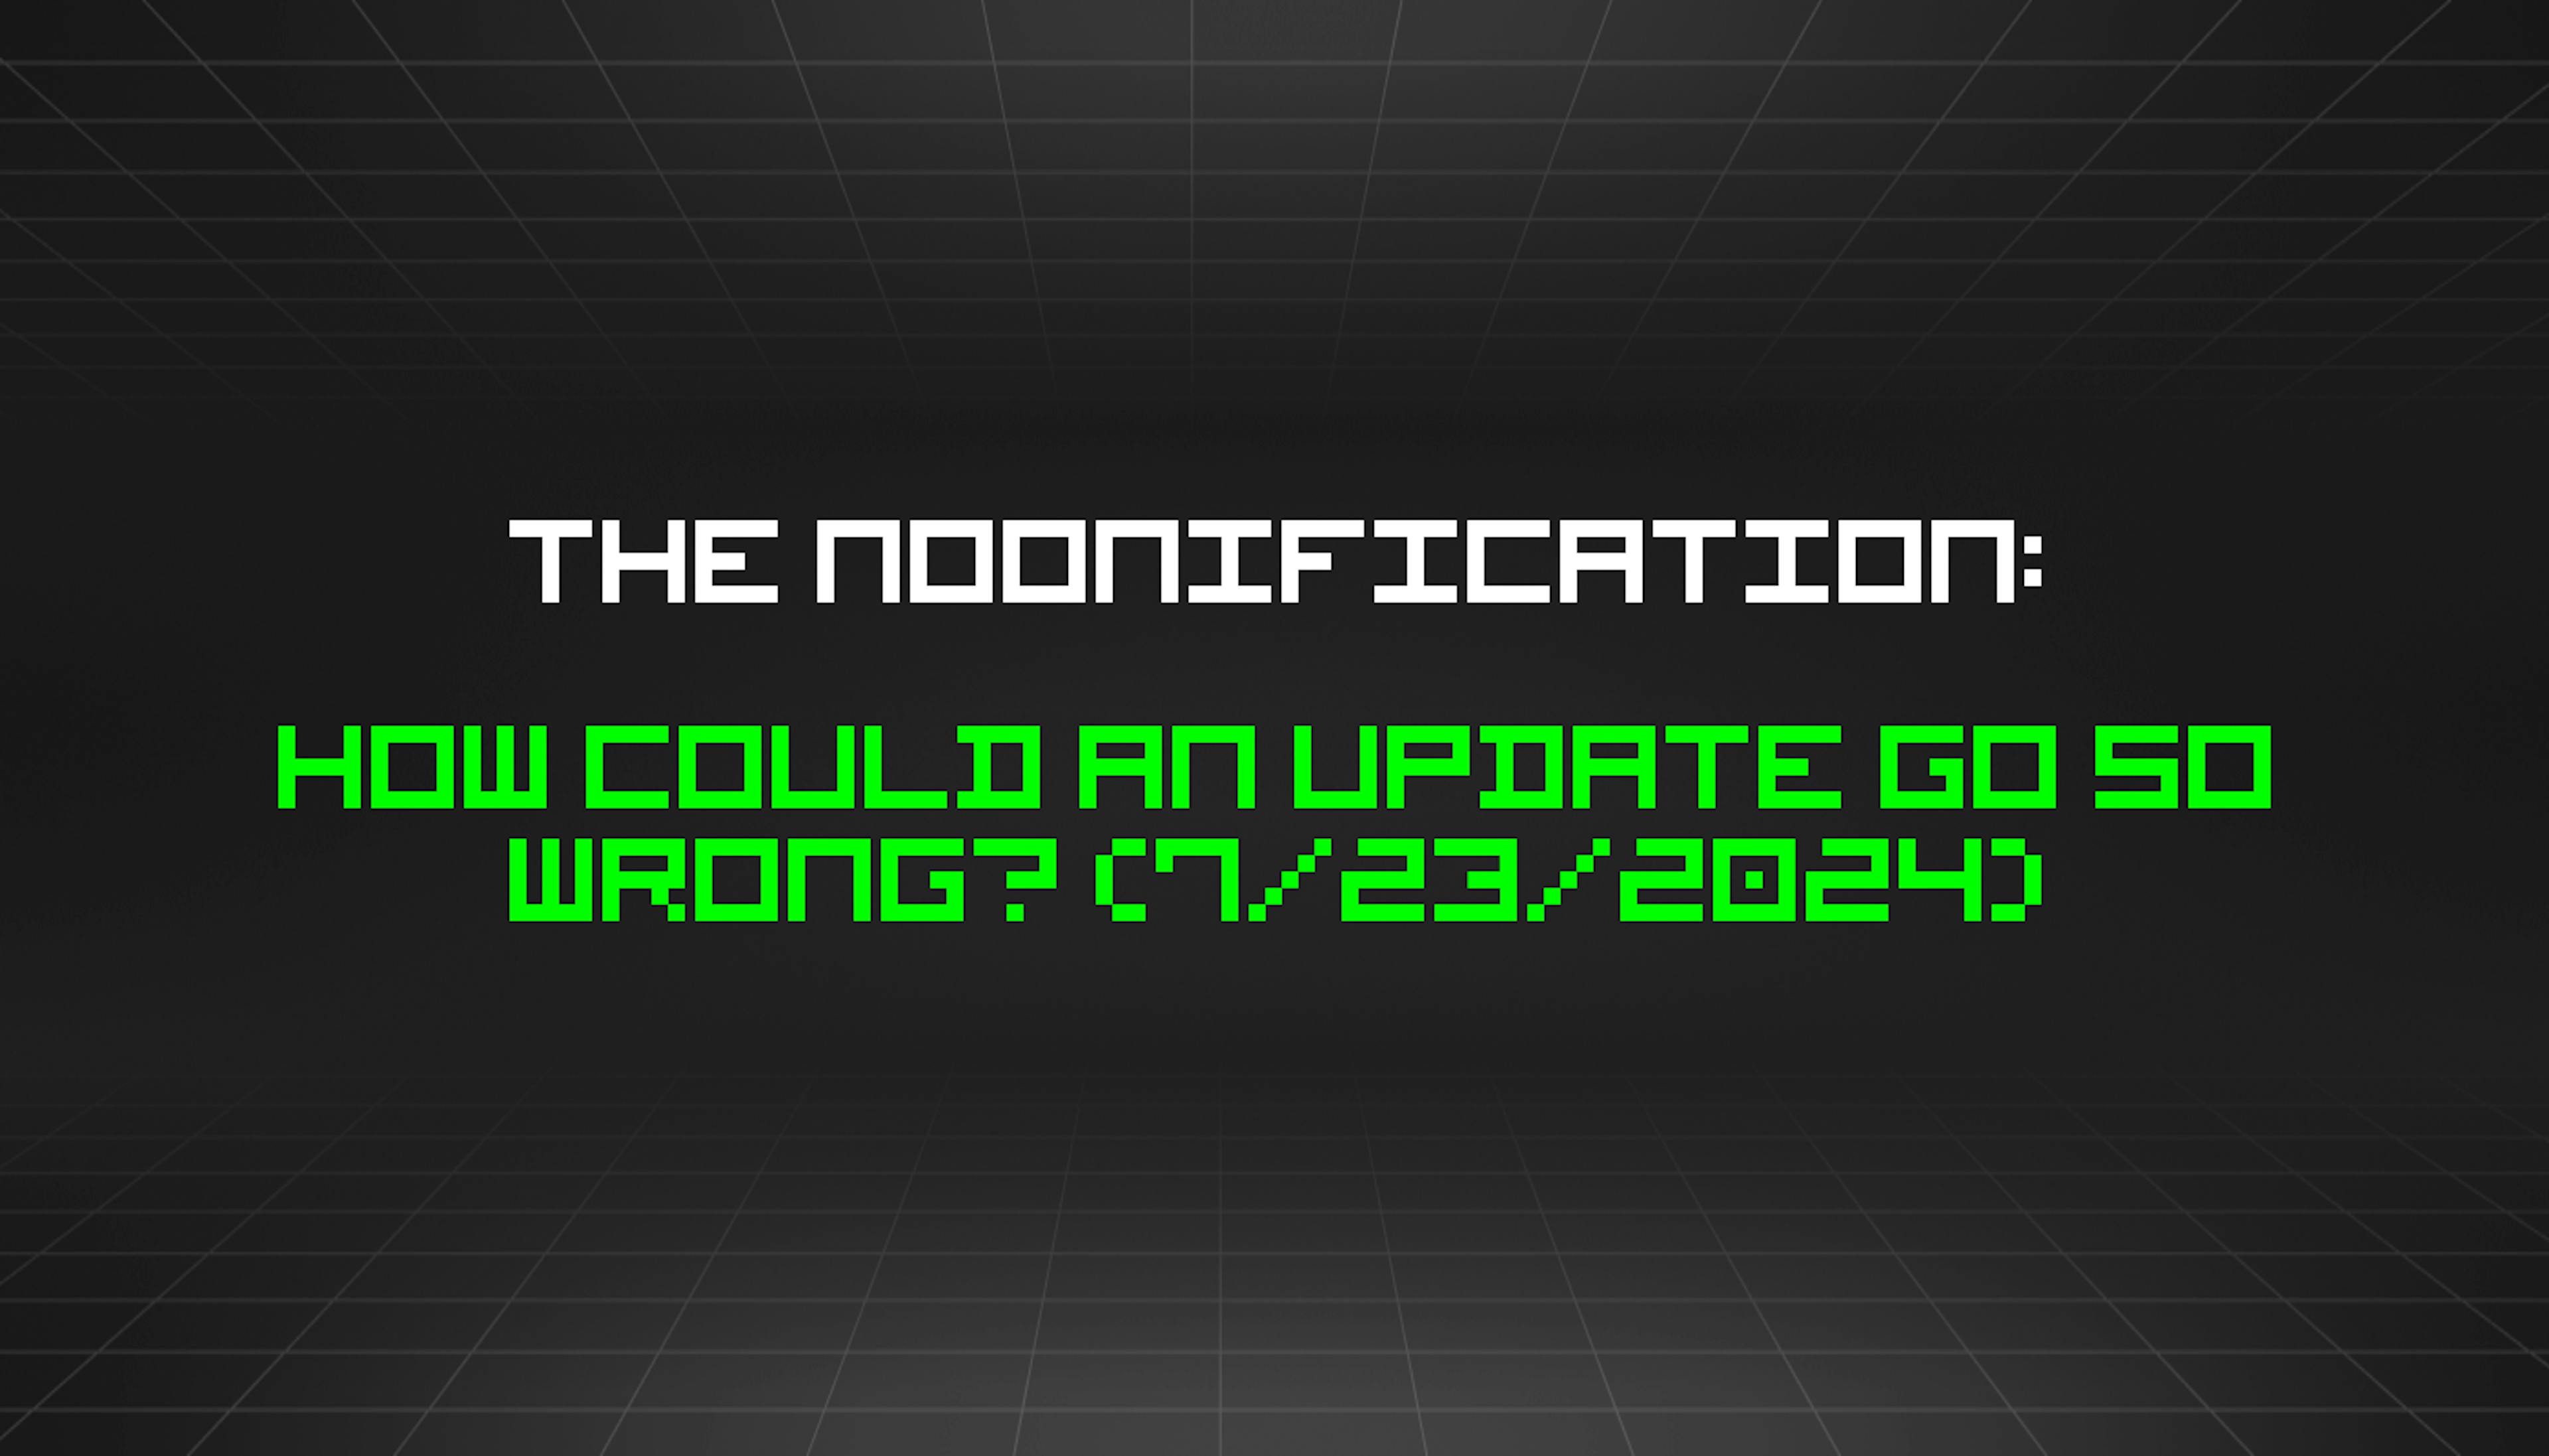 /7-23-2024-noonification feature image